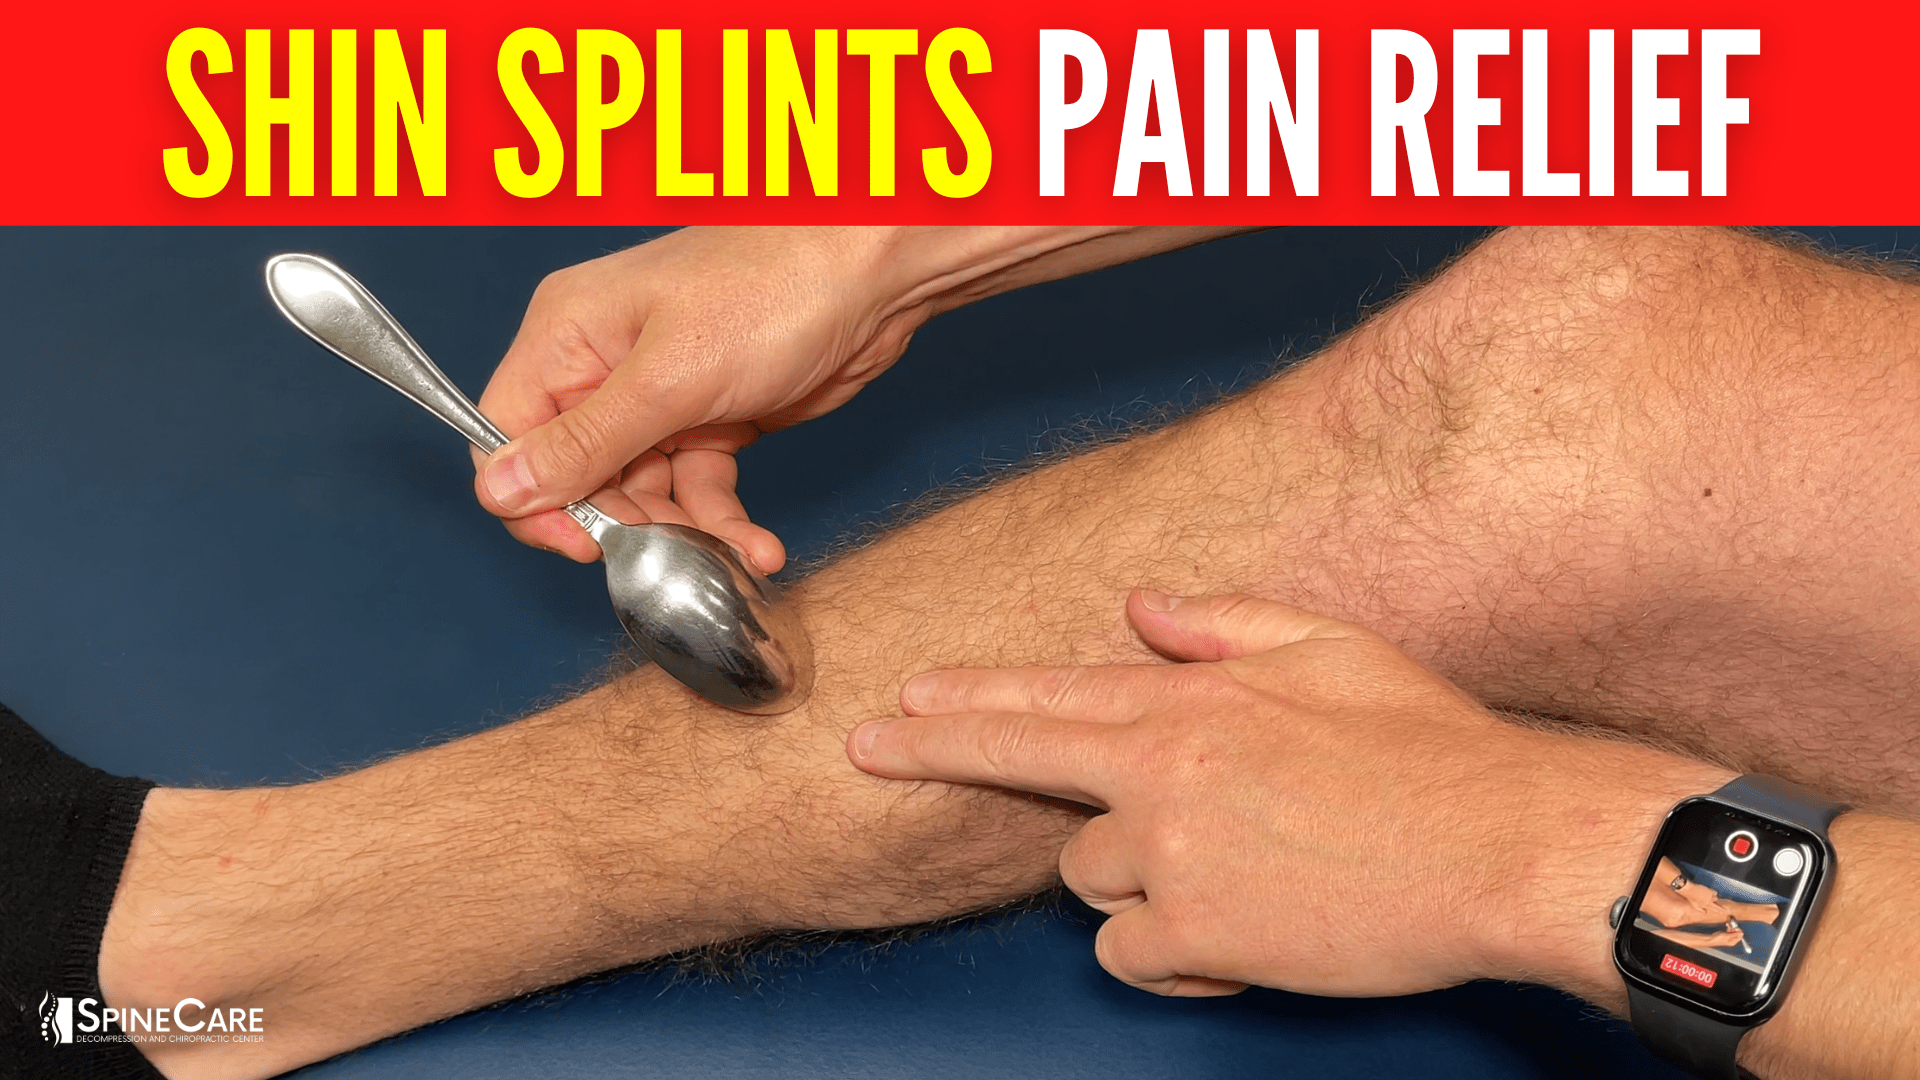 How to Fix Shin Splints in 30 SECONDS | SpineCare | St. Joseph, Michigan Chiropractor